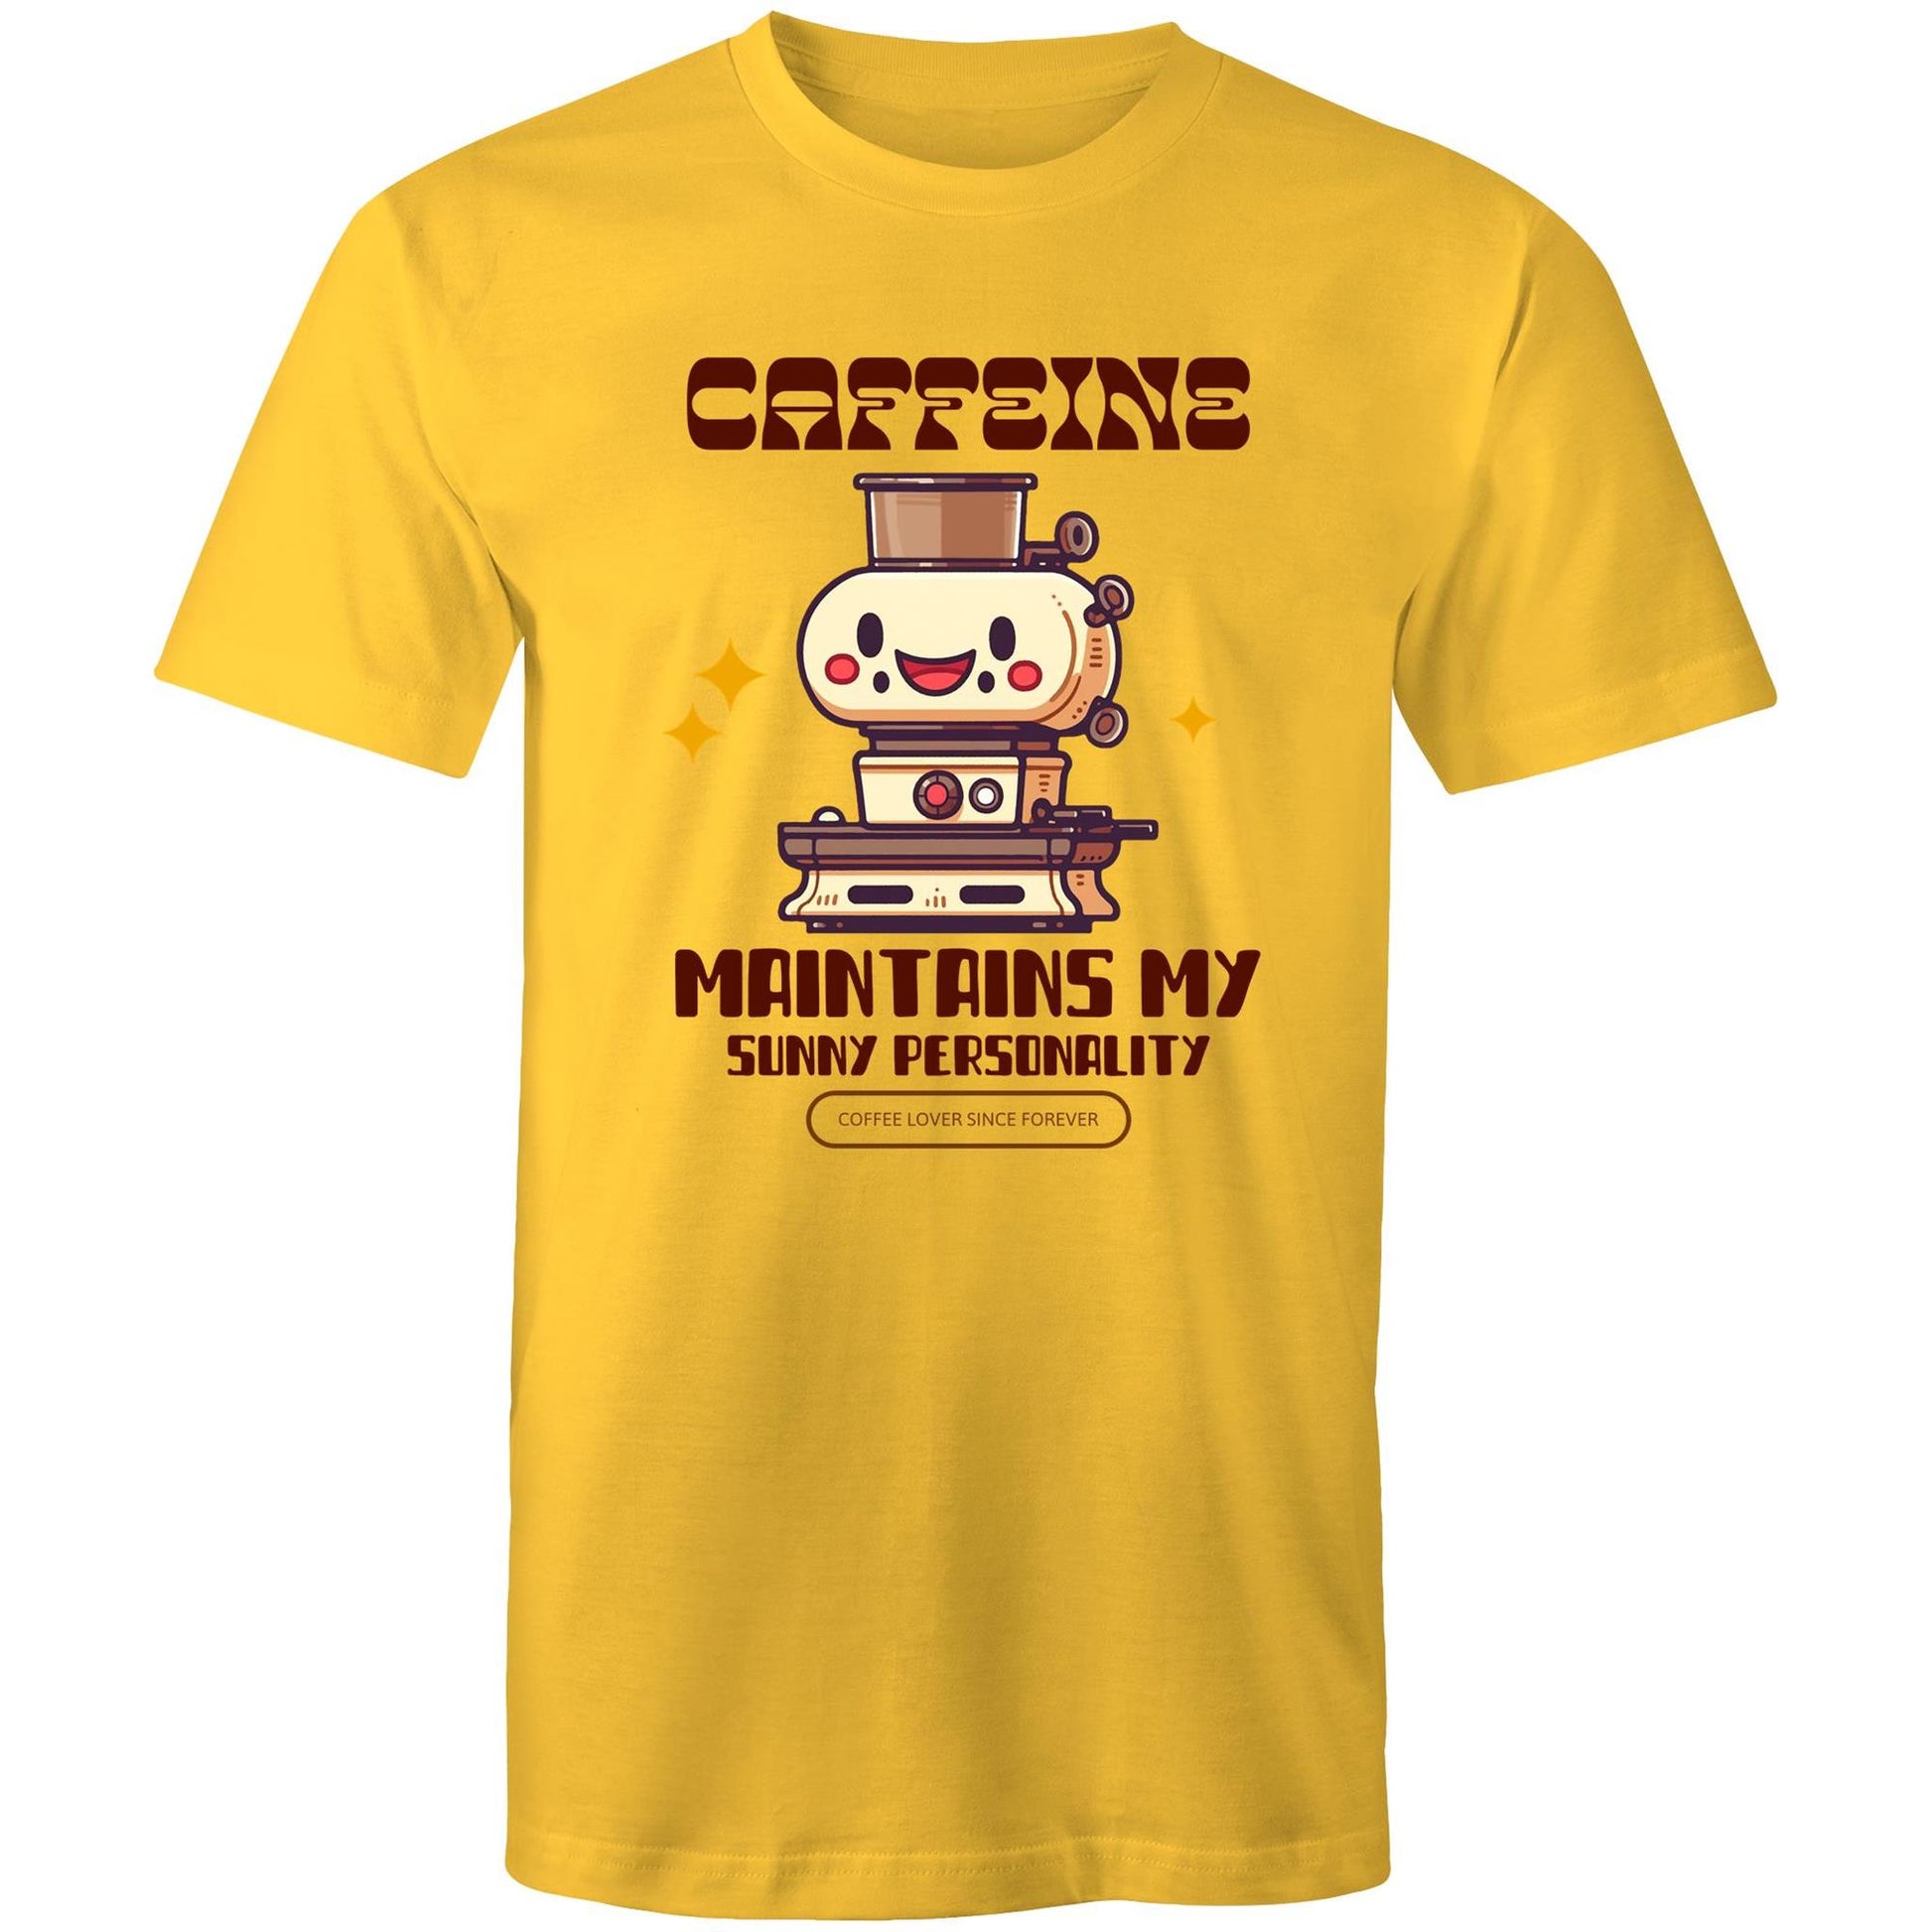 Caffeine Maintains My Sunny Personality - Mens T-Shirt Yellow Mens T-shirt Coffee